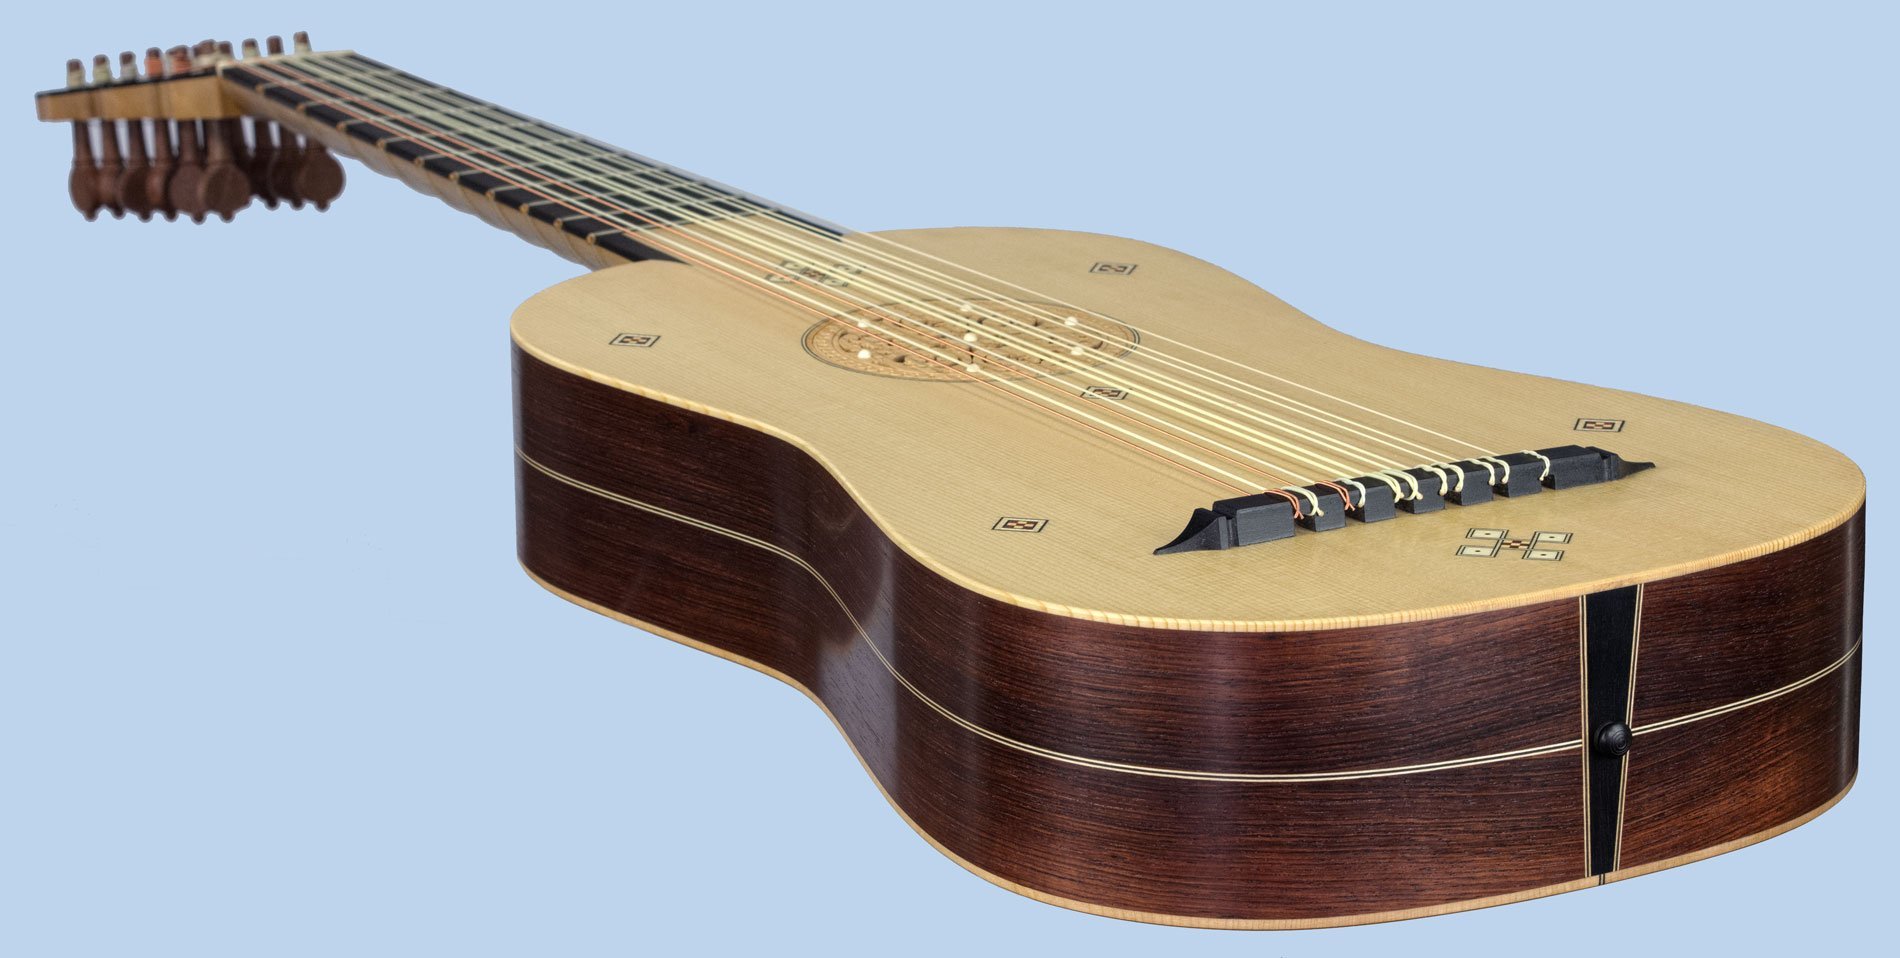 Flat-back vihuela with inlays end view in perspective